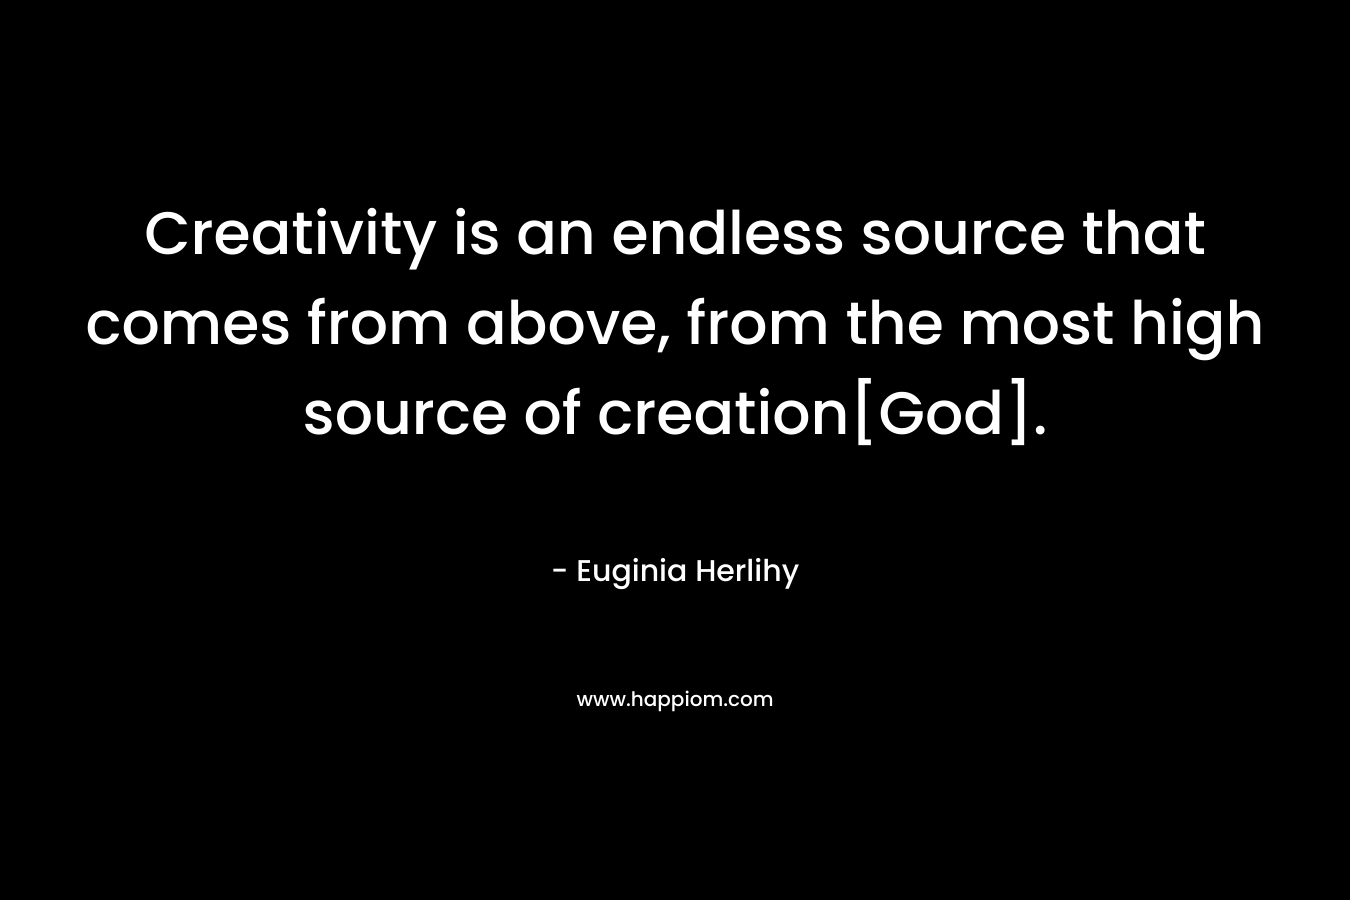 Creativity is an endless source that comes from above, from the most high source of creation[God]. – Euginia Herlihy